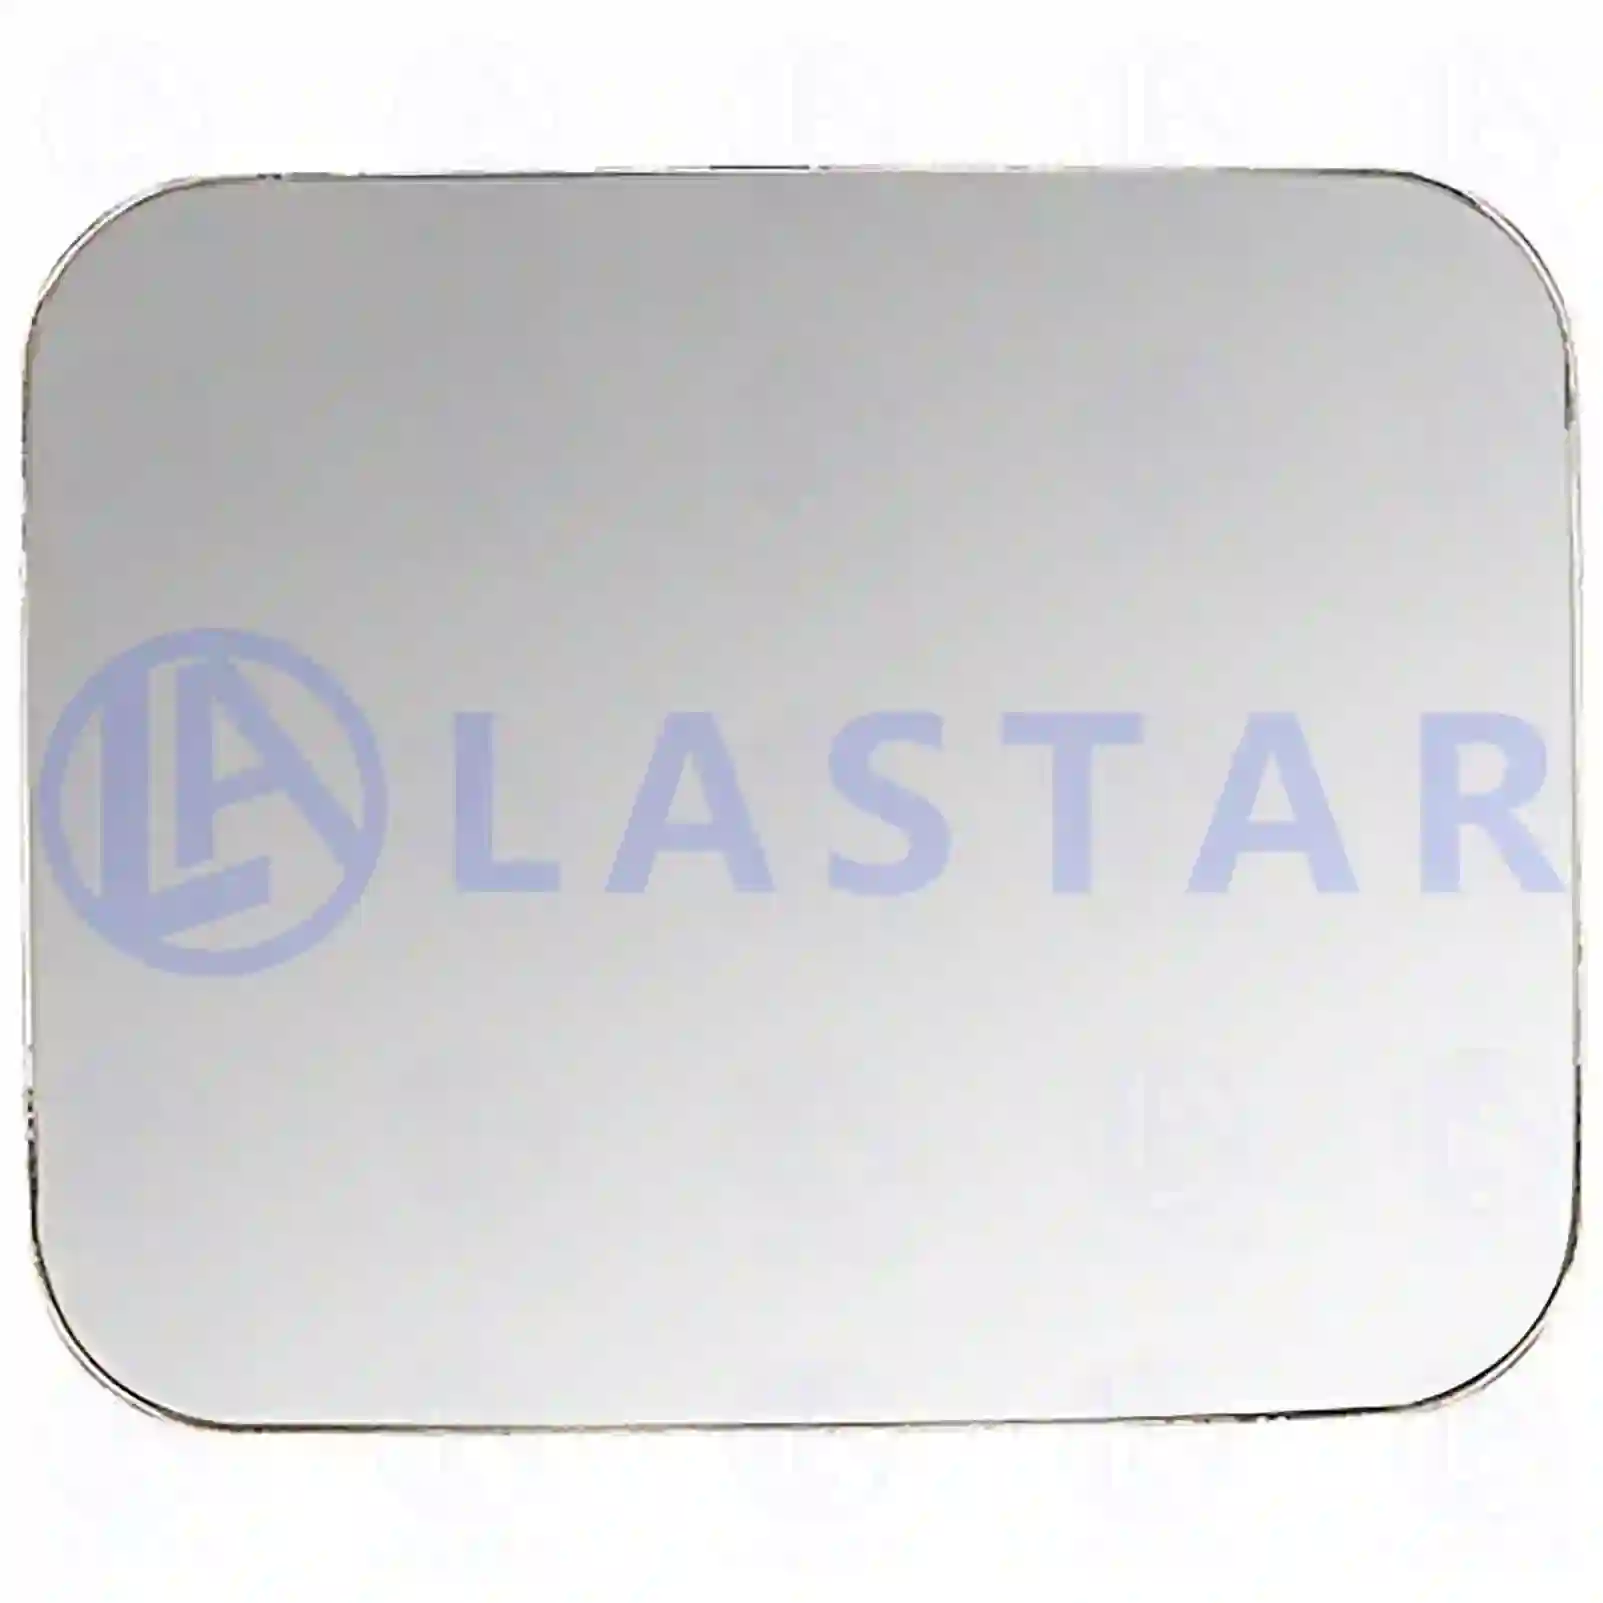 Mirror glass, wide view mirror, 77720133, 0699853, 589430, 699853, 1699016, ZG61012-0008 ||  77720133 Lastar Spare Part | Truck Spare Parts, Auotomotive Spare Parts Mirror glass, wide view mirror, 77720133, 0699853, 589430, 699853, 1699016, ZG61012-0008 ||  77720133 Lastar Spare Part | Truck Spare Parts, Auotomotive Spare Parts